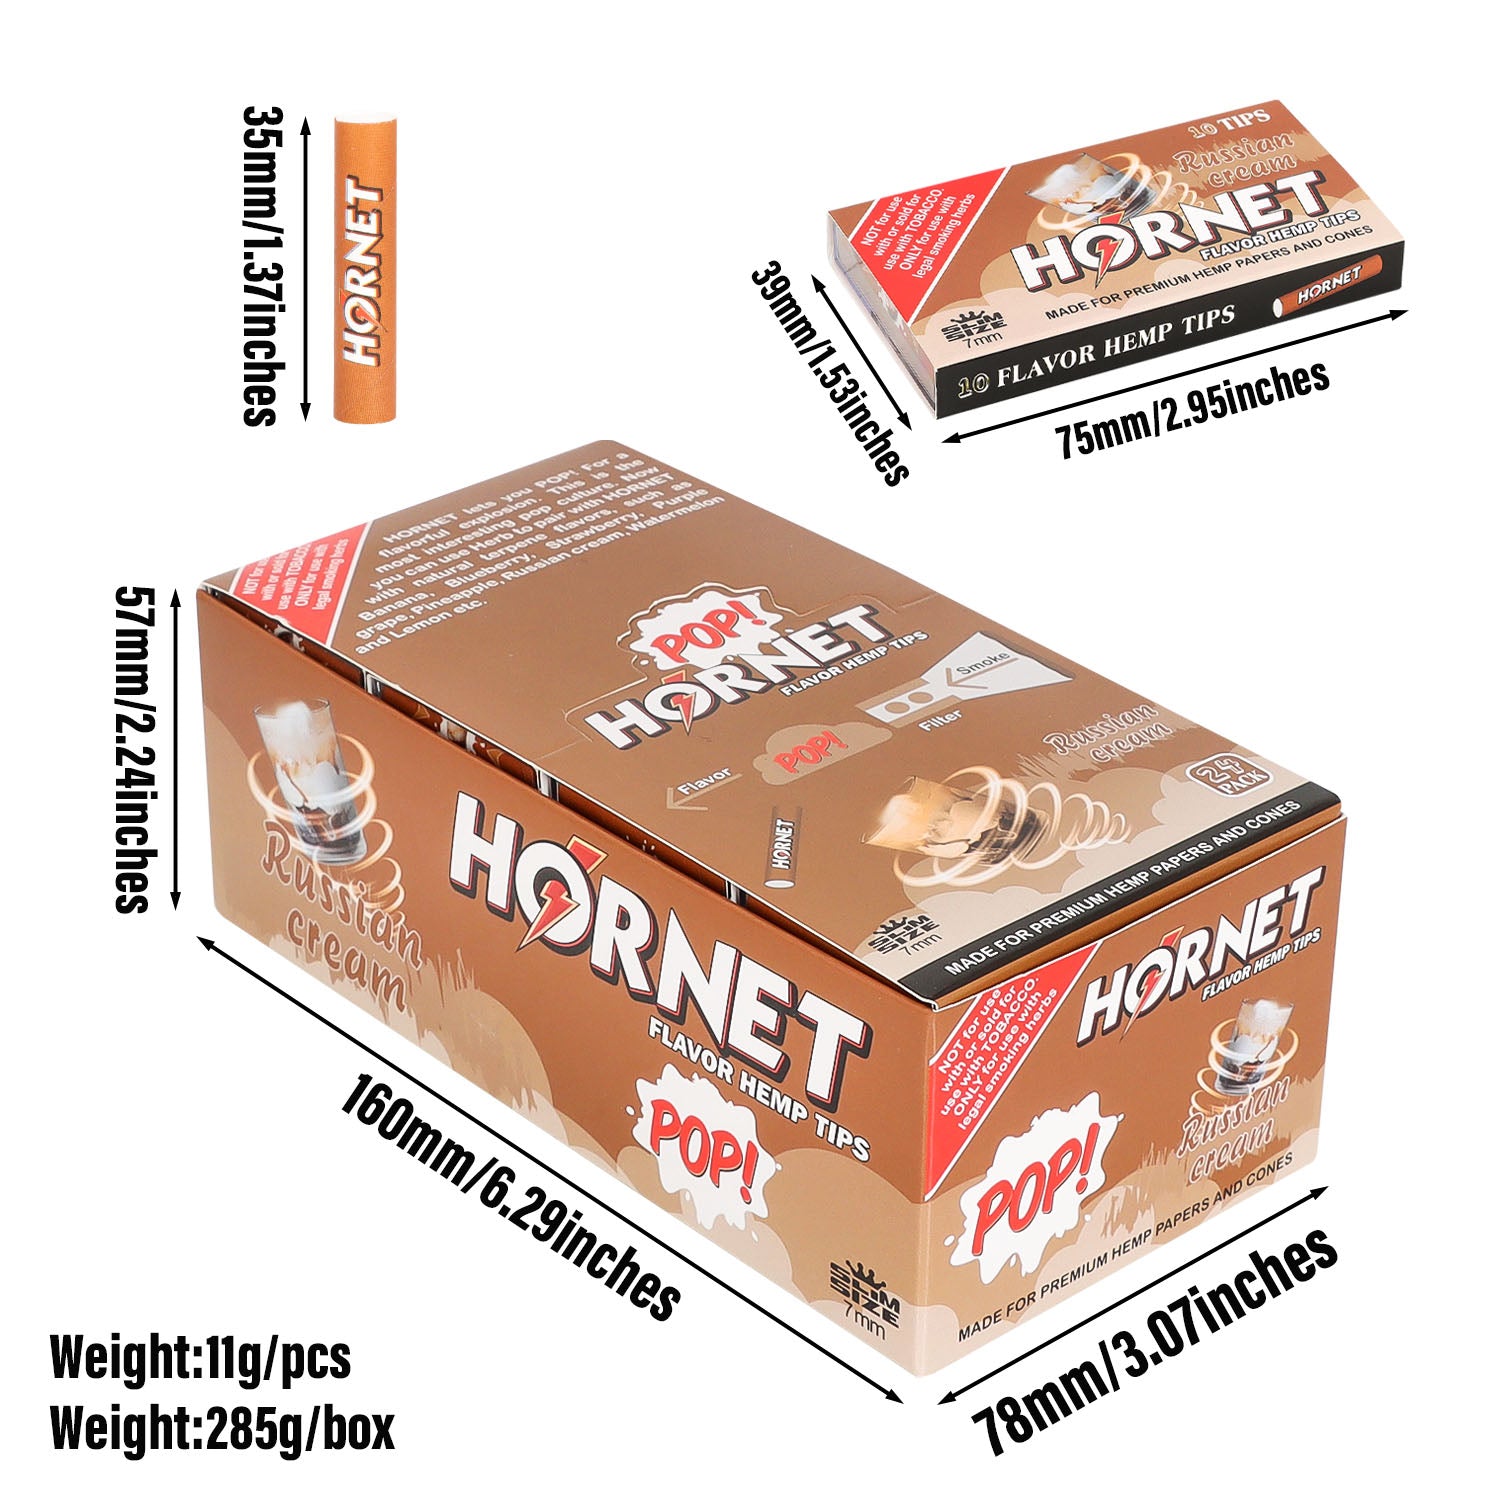 HORNET Russia Cream Flavors Filter Tips with Flavored Pop, 7 mm Filter Tips, 10 Tips / Pack 24 Packs / Box